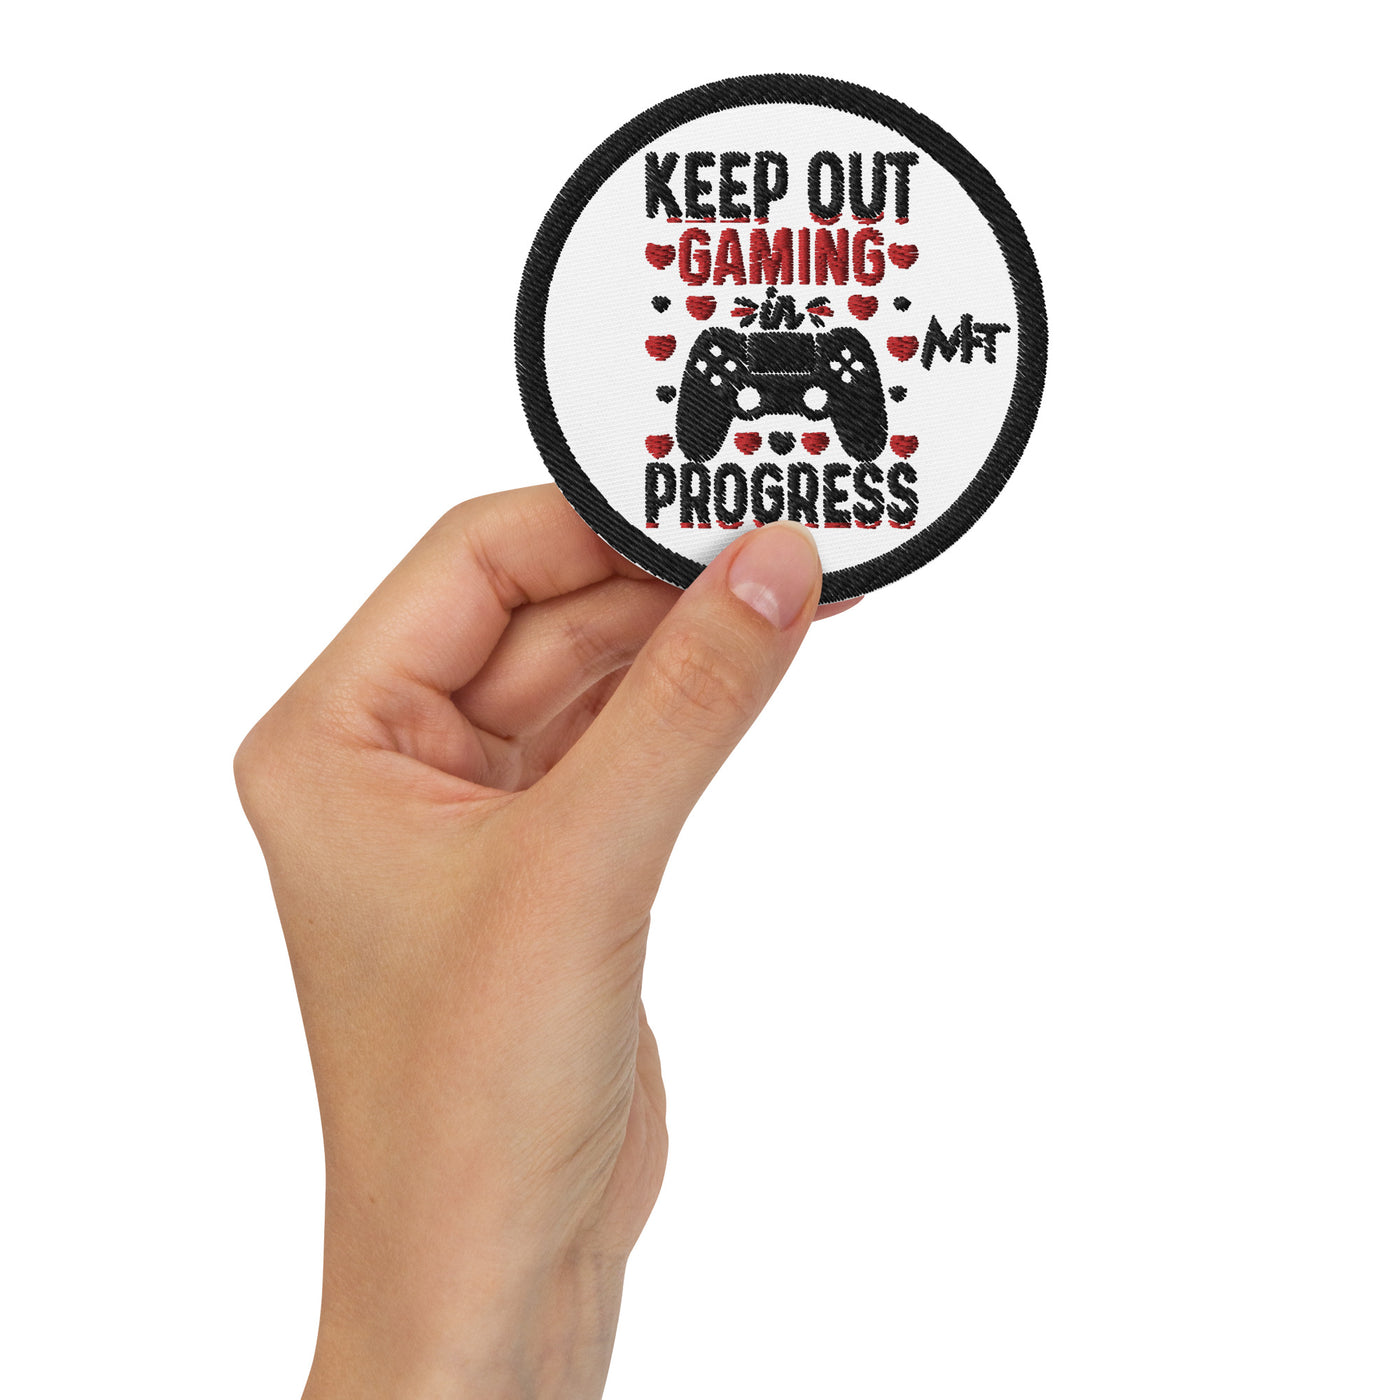 Keep out Gaming in Progress - Embroidered patches